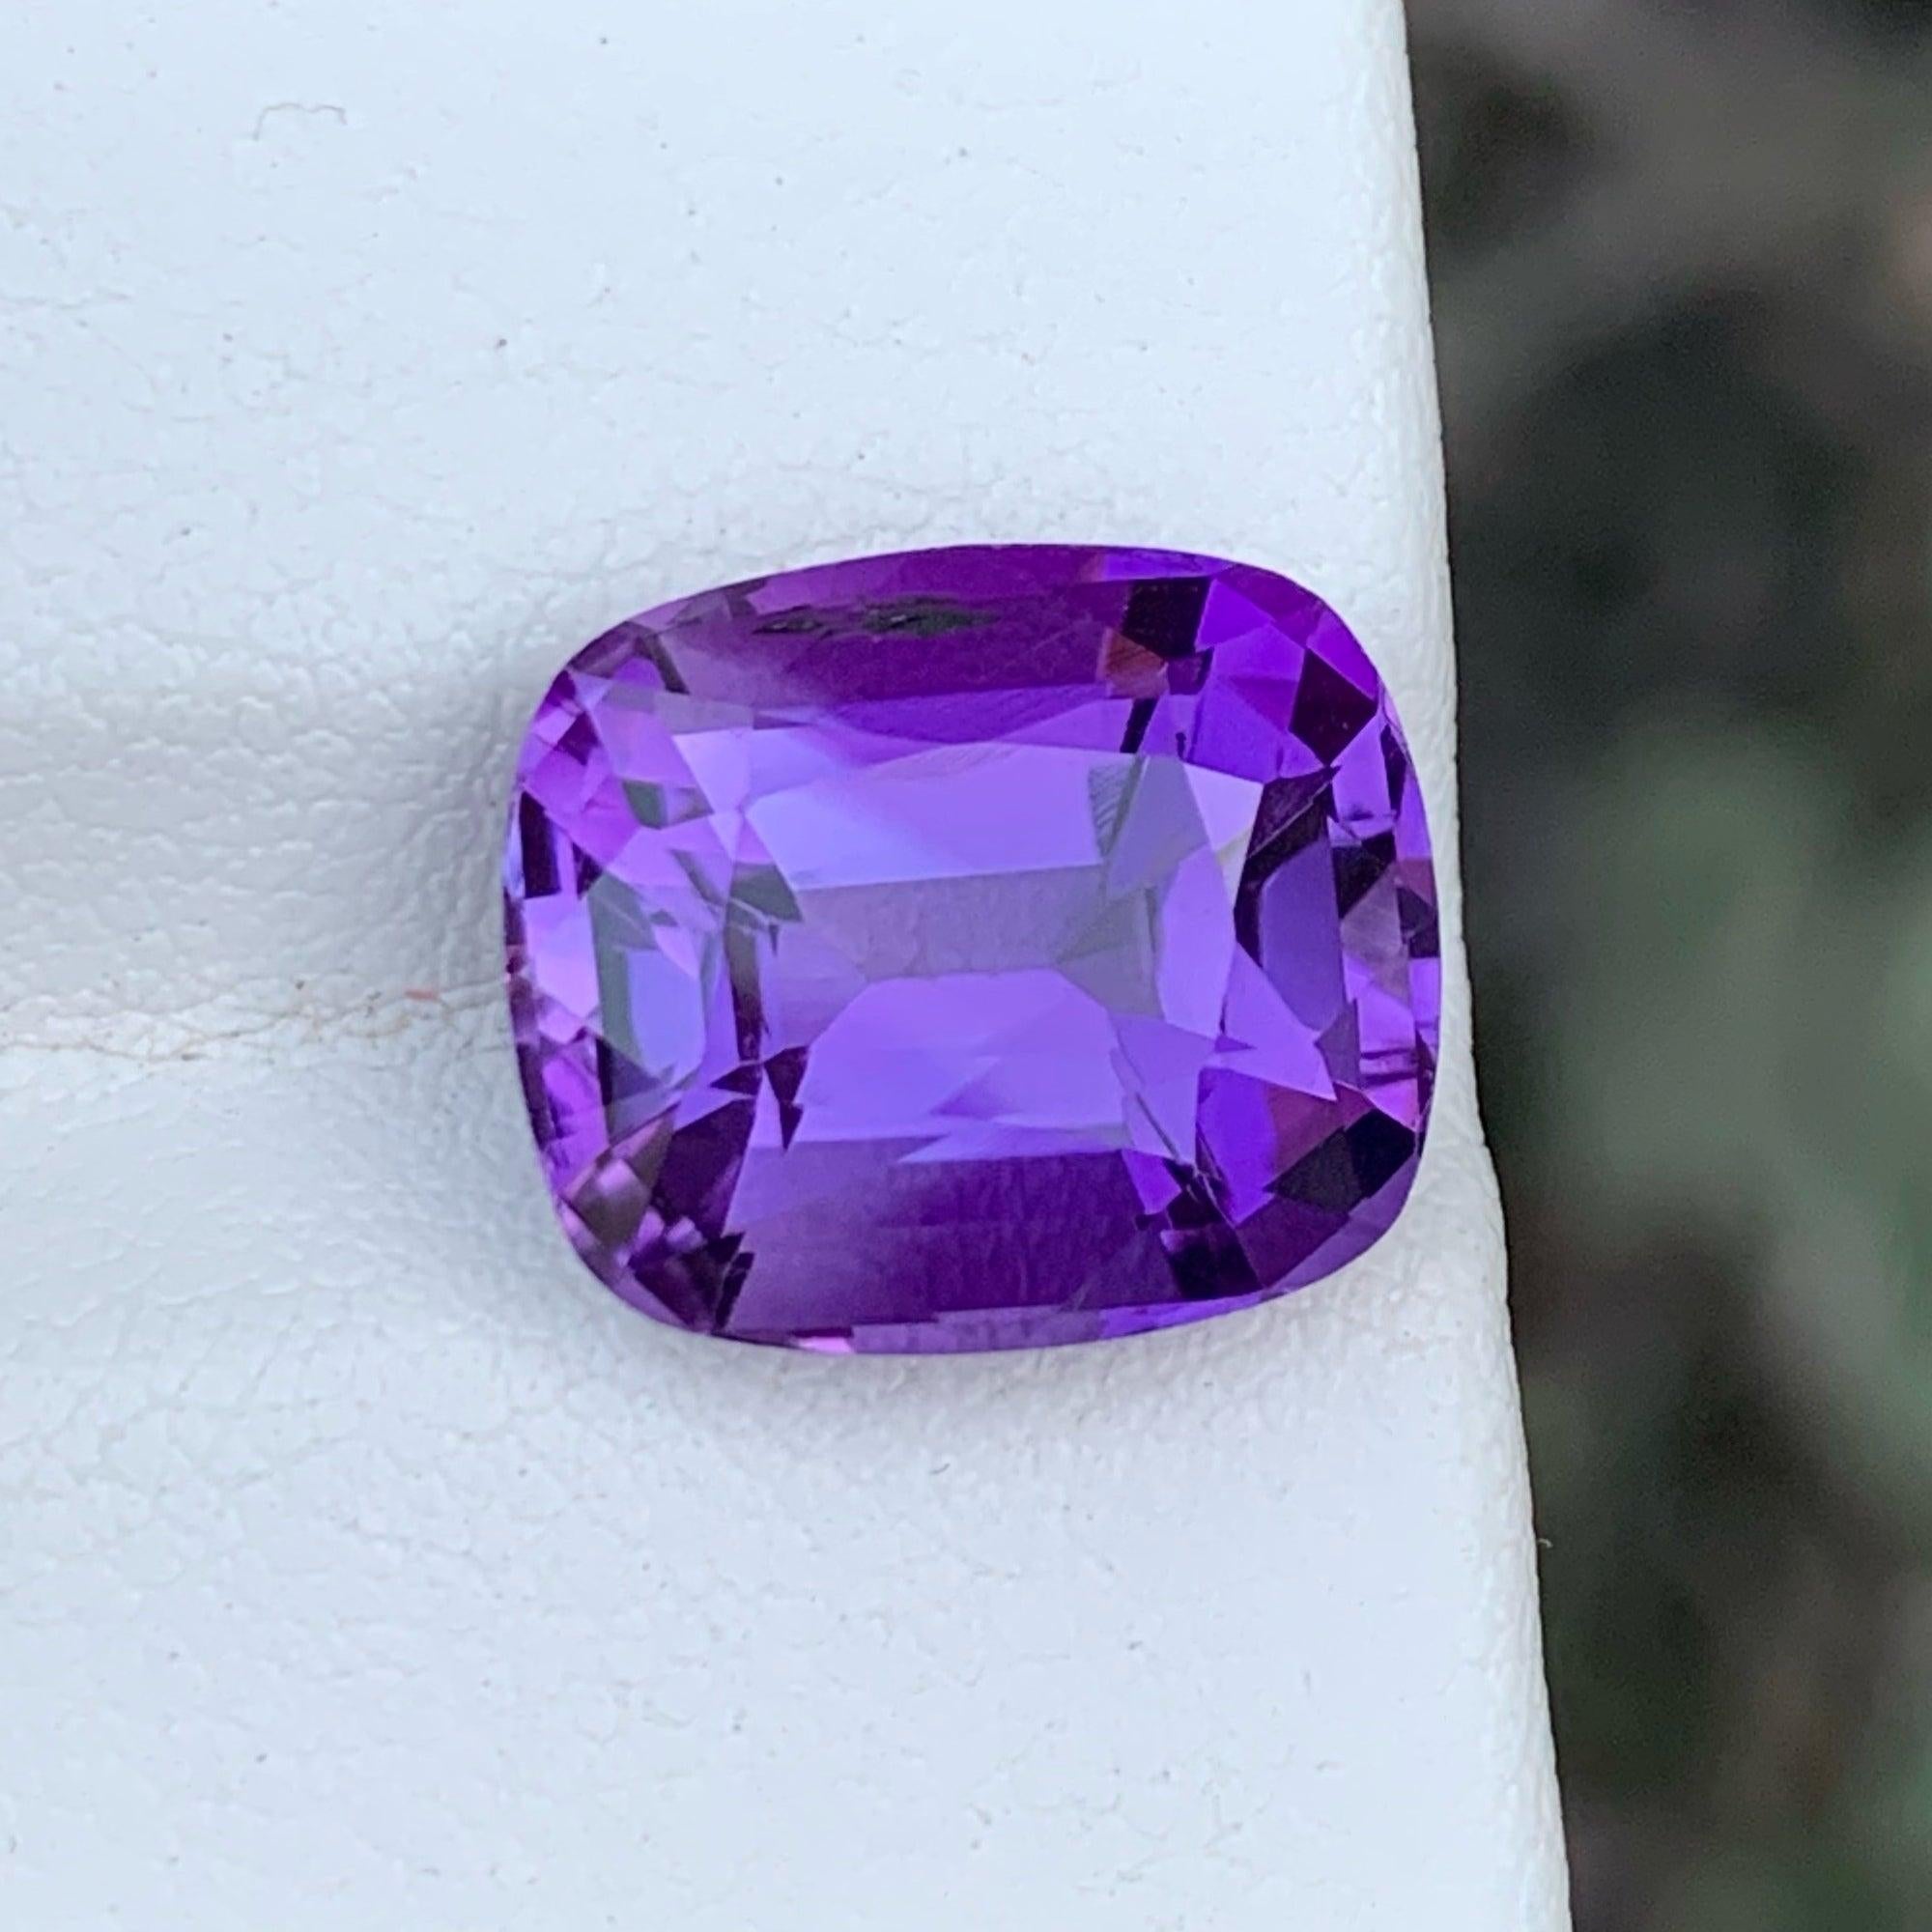 Cushion Cut Exceptional Royal Purple Amethyst Stone 6.80 Carats Loose Gems Ring Jewelry For Sale